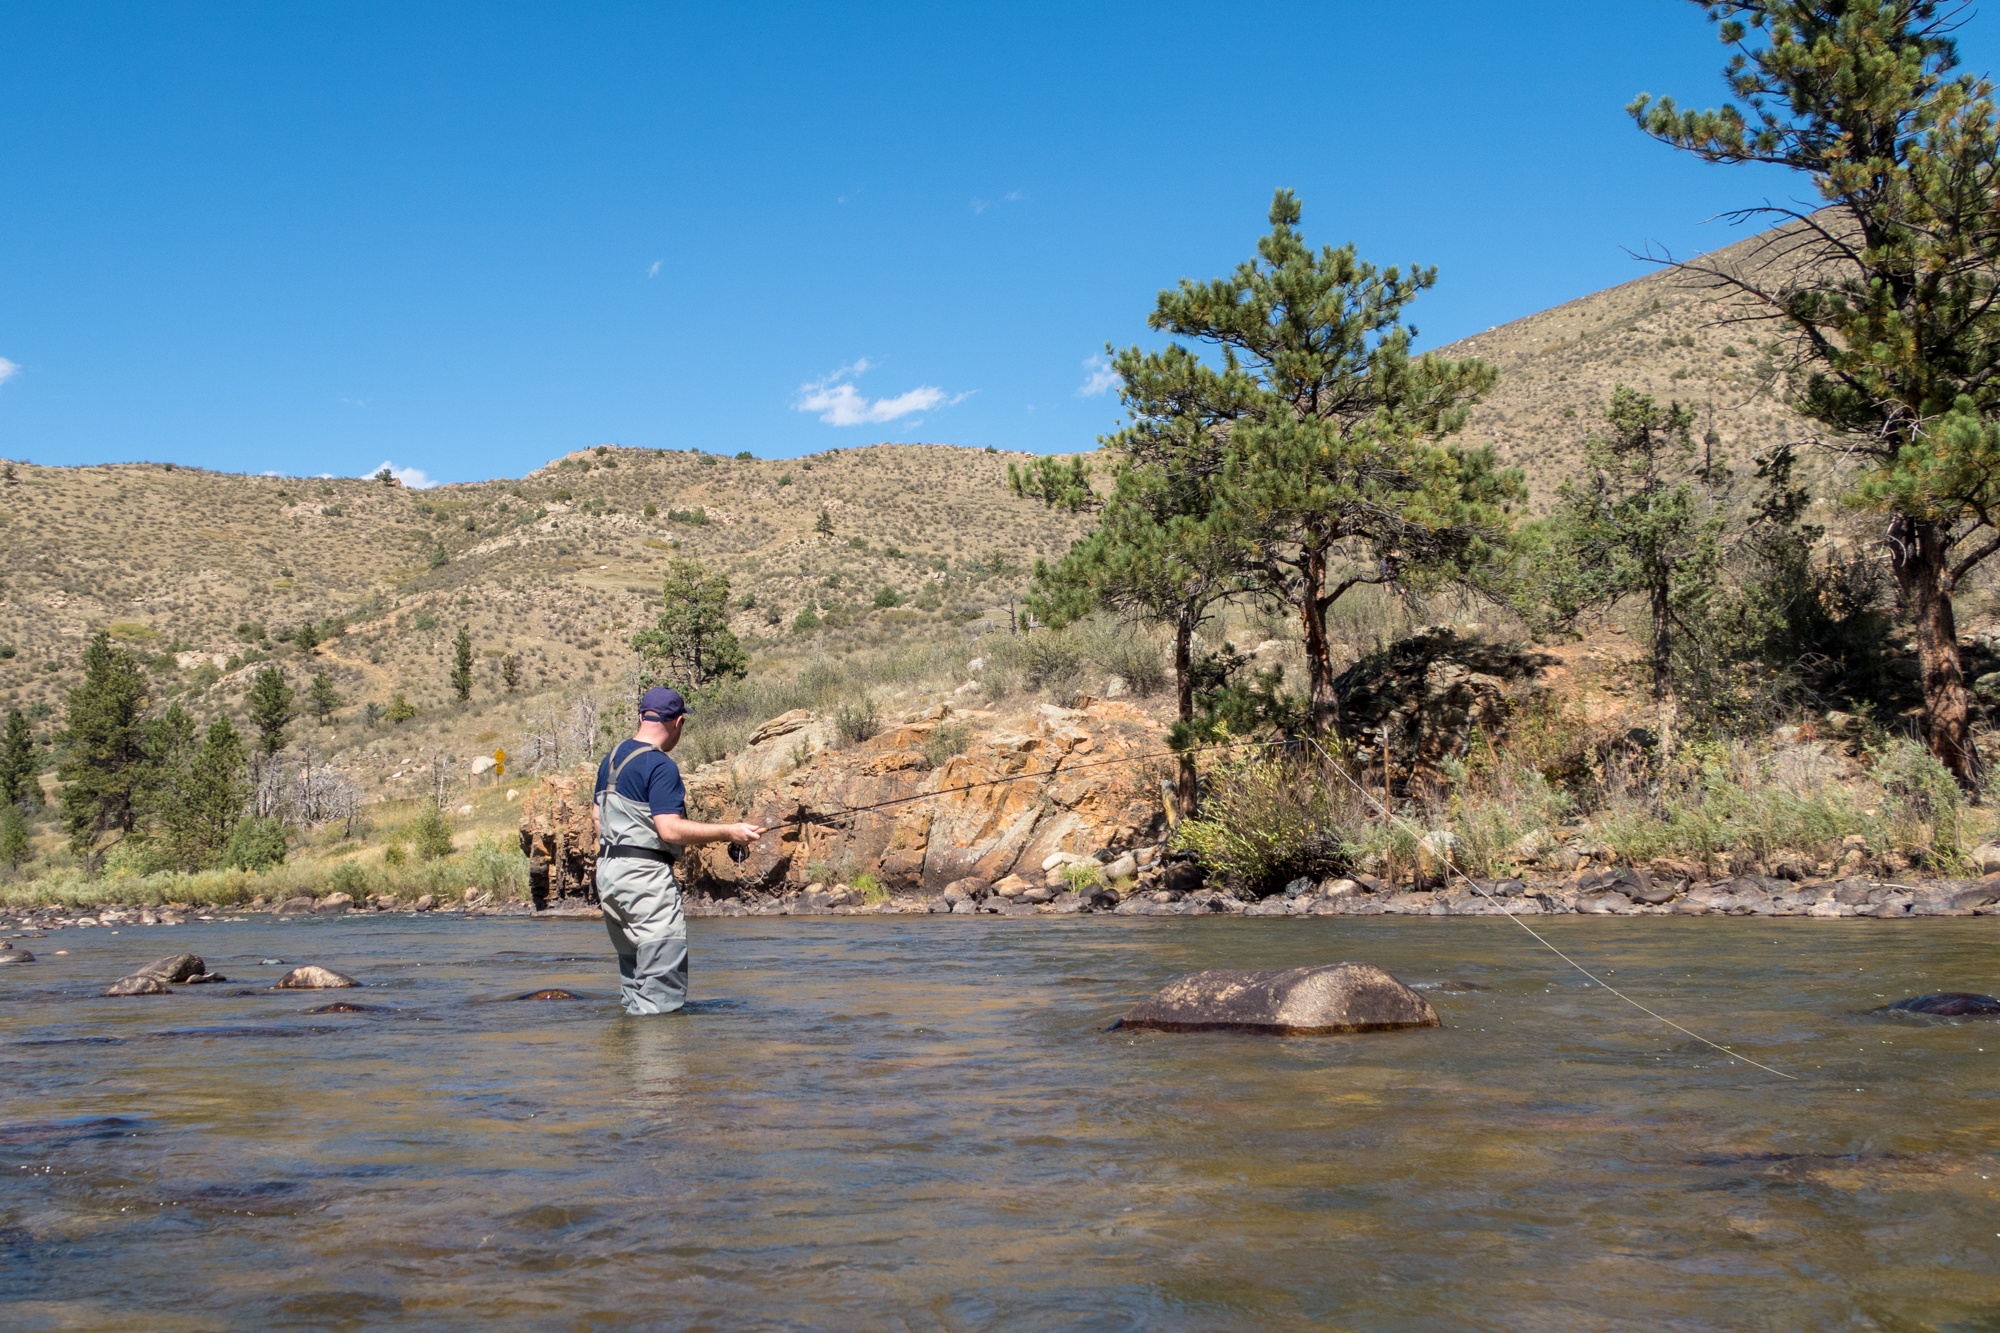 Fly fishing for beginners